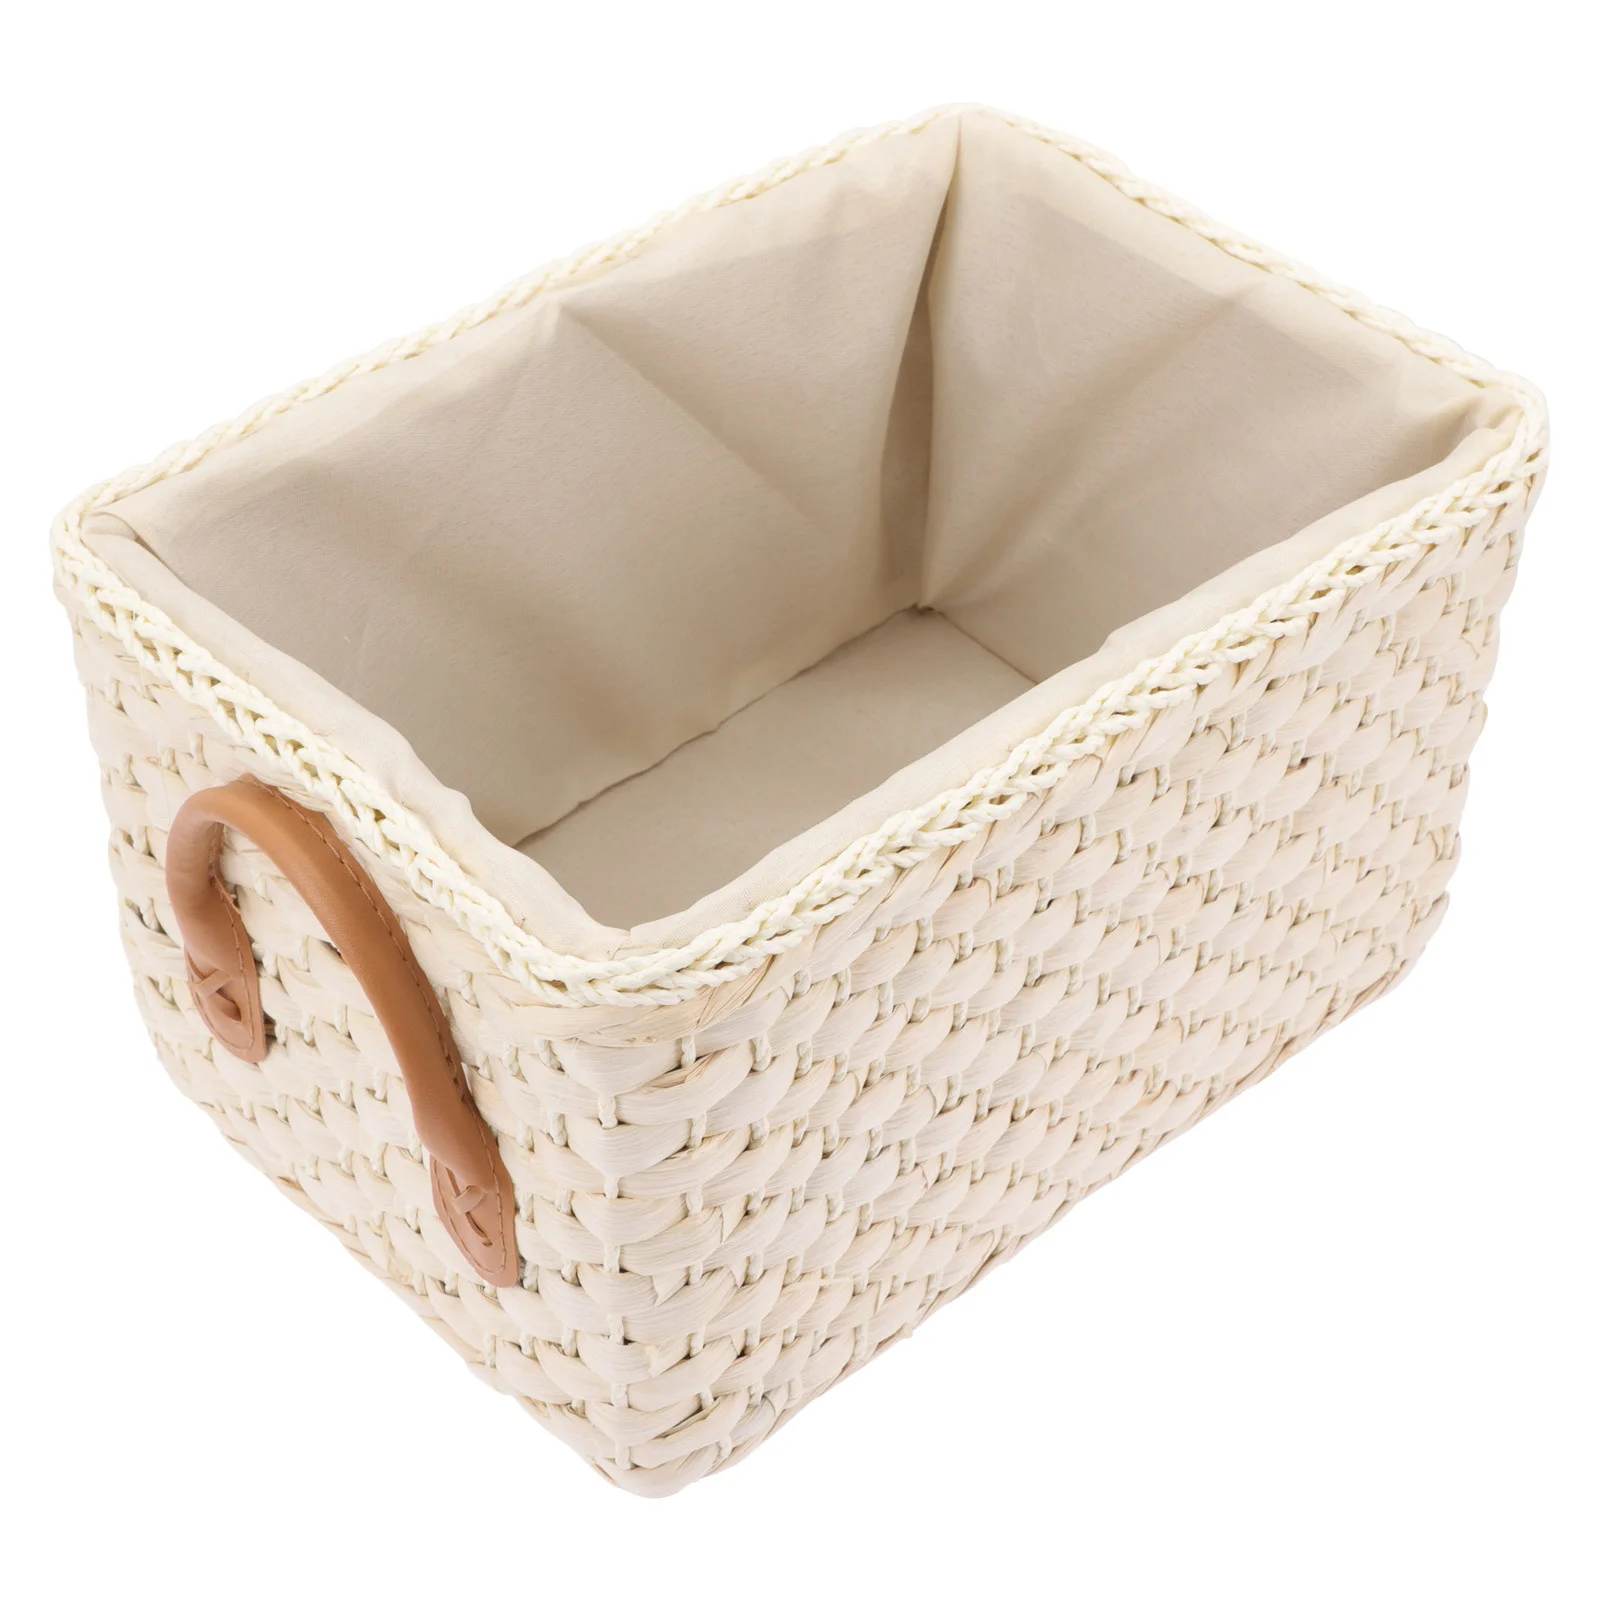 

Basket Storage Woven Baskets Box Sundries Organizer Bread Desktop Clothes Tray Wicker Toy Rattan Laundry Seagrass Wooden Picnic